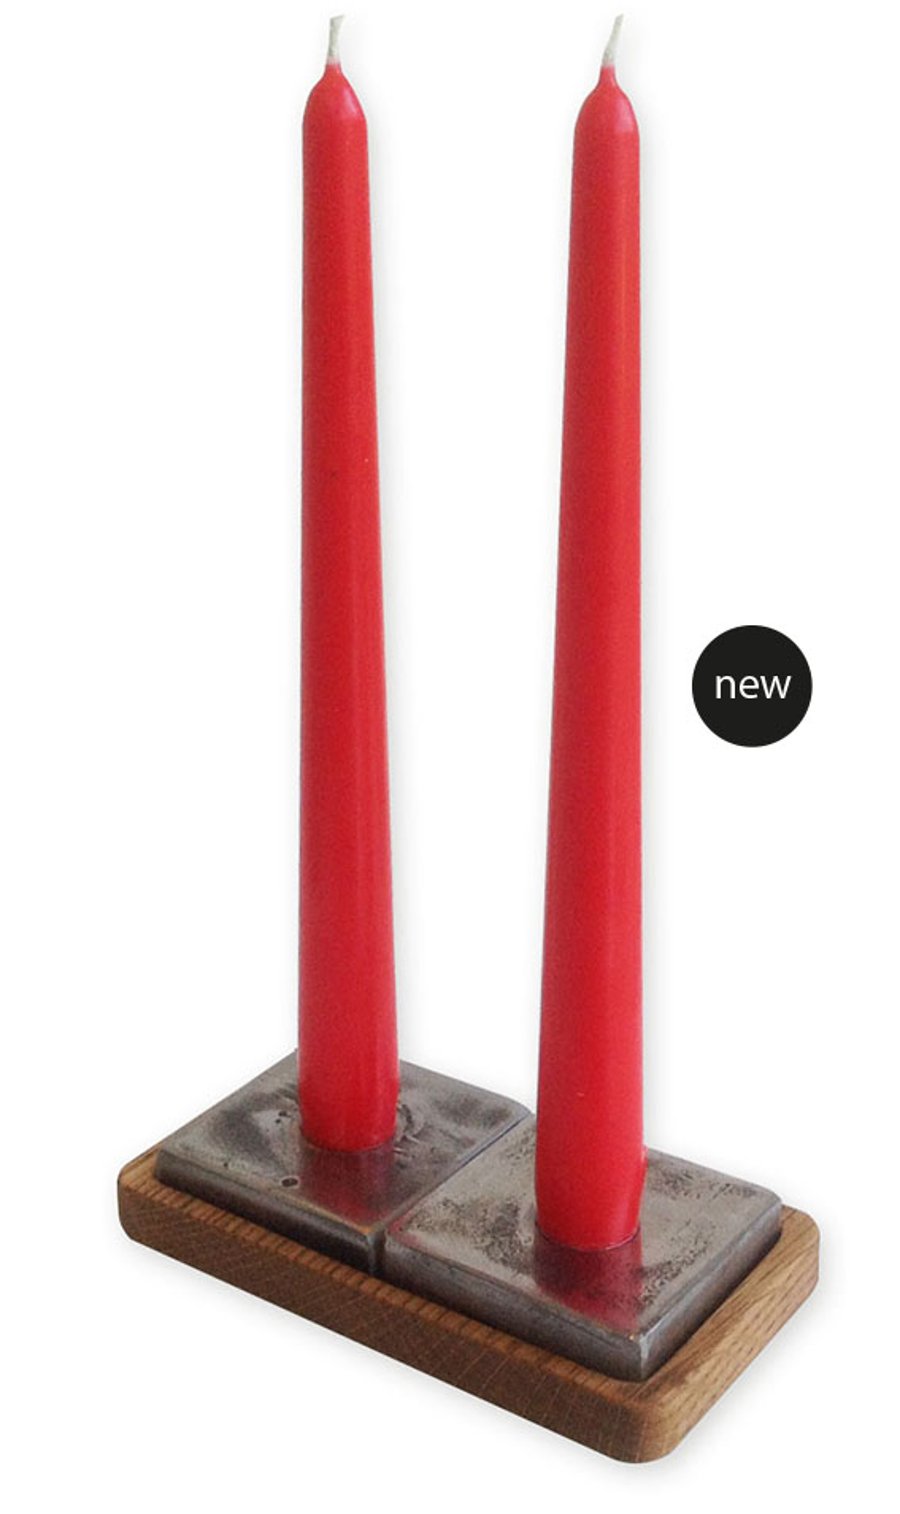 Polished steel twin candle holder set with oak tray and candles